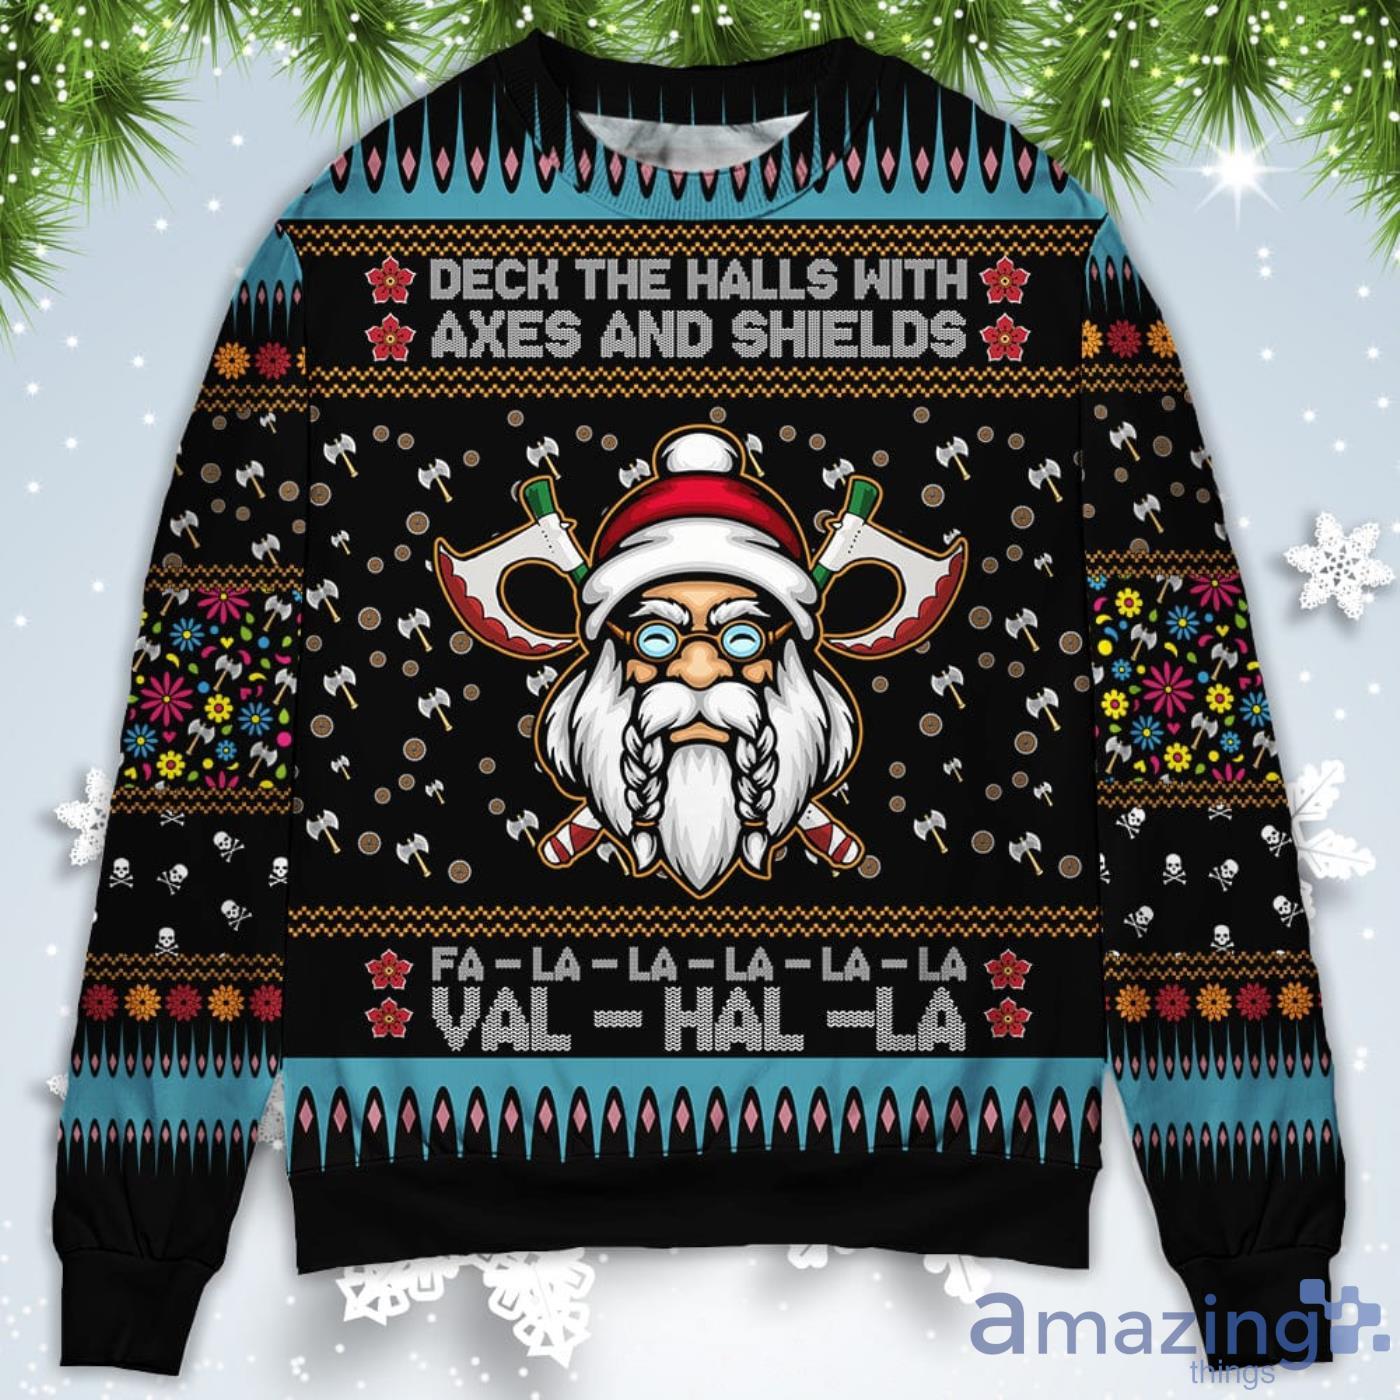 Viking Deck The Halls With Axes And Shields Christmas Sweatshirt Sweater Product Photo 1